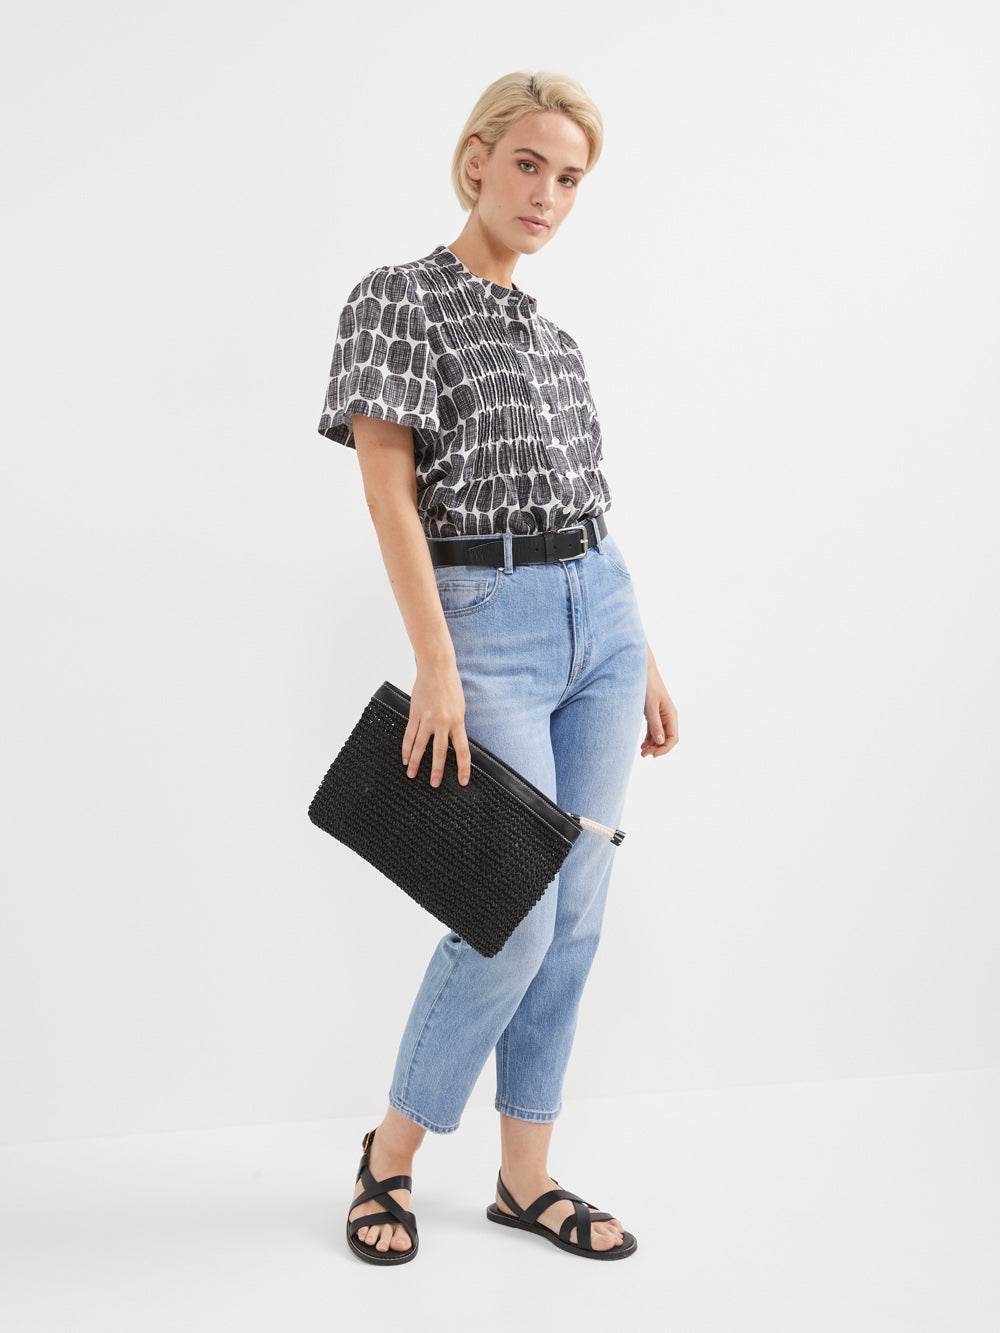 The Etched Print Linen Top